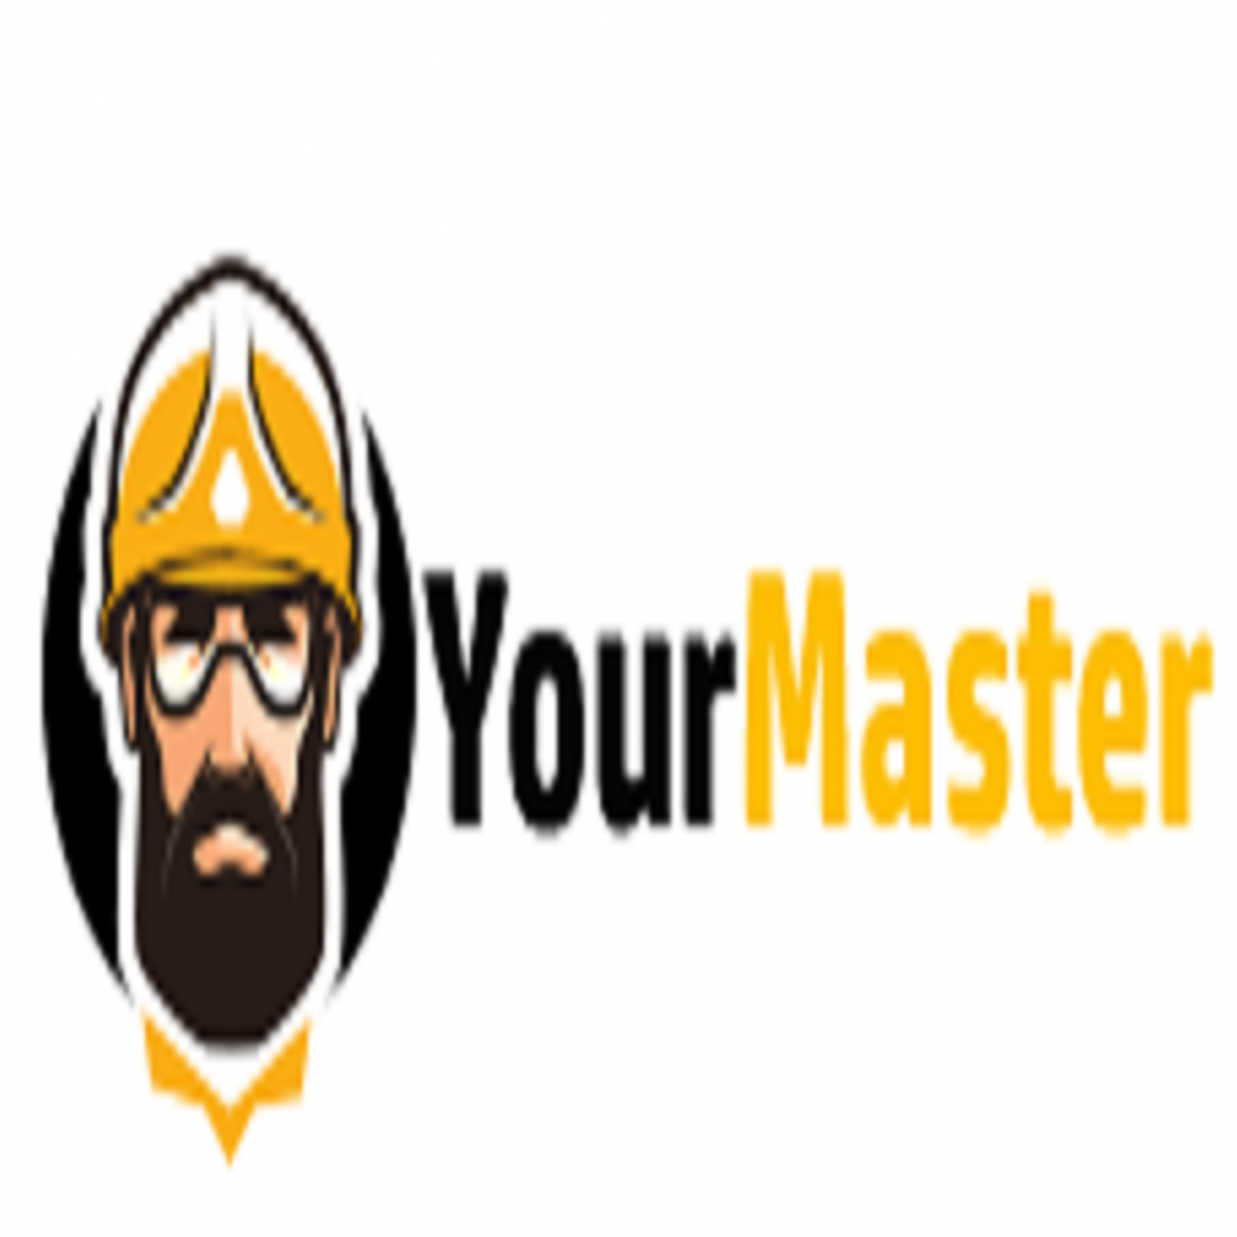 yourmaster